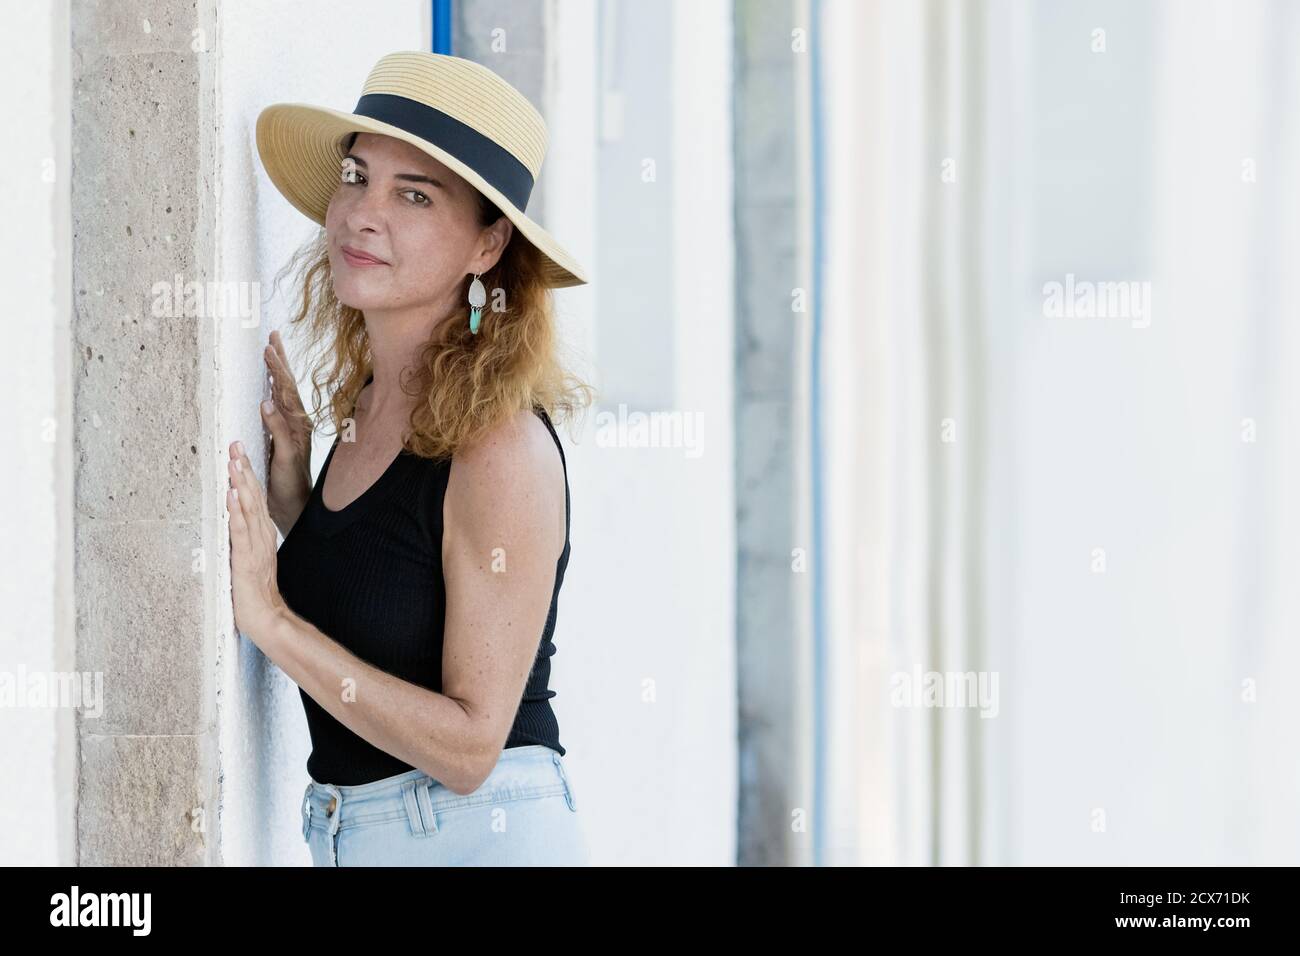 Portrait of a woman 40-45 years looking camera wearing casual clothes and a straw hat, serious, laying on a wall. Stock Photo